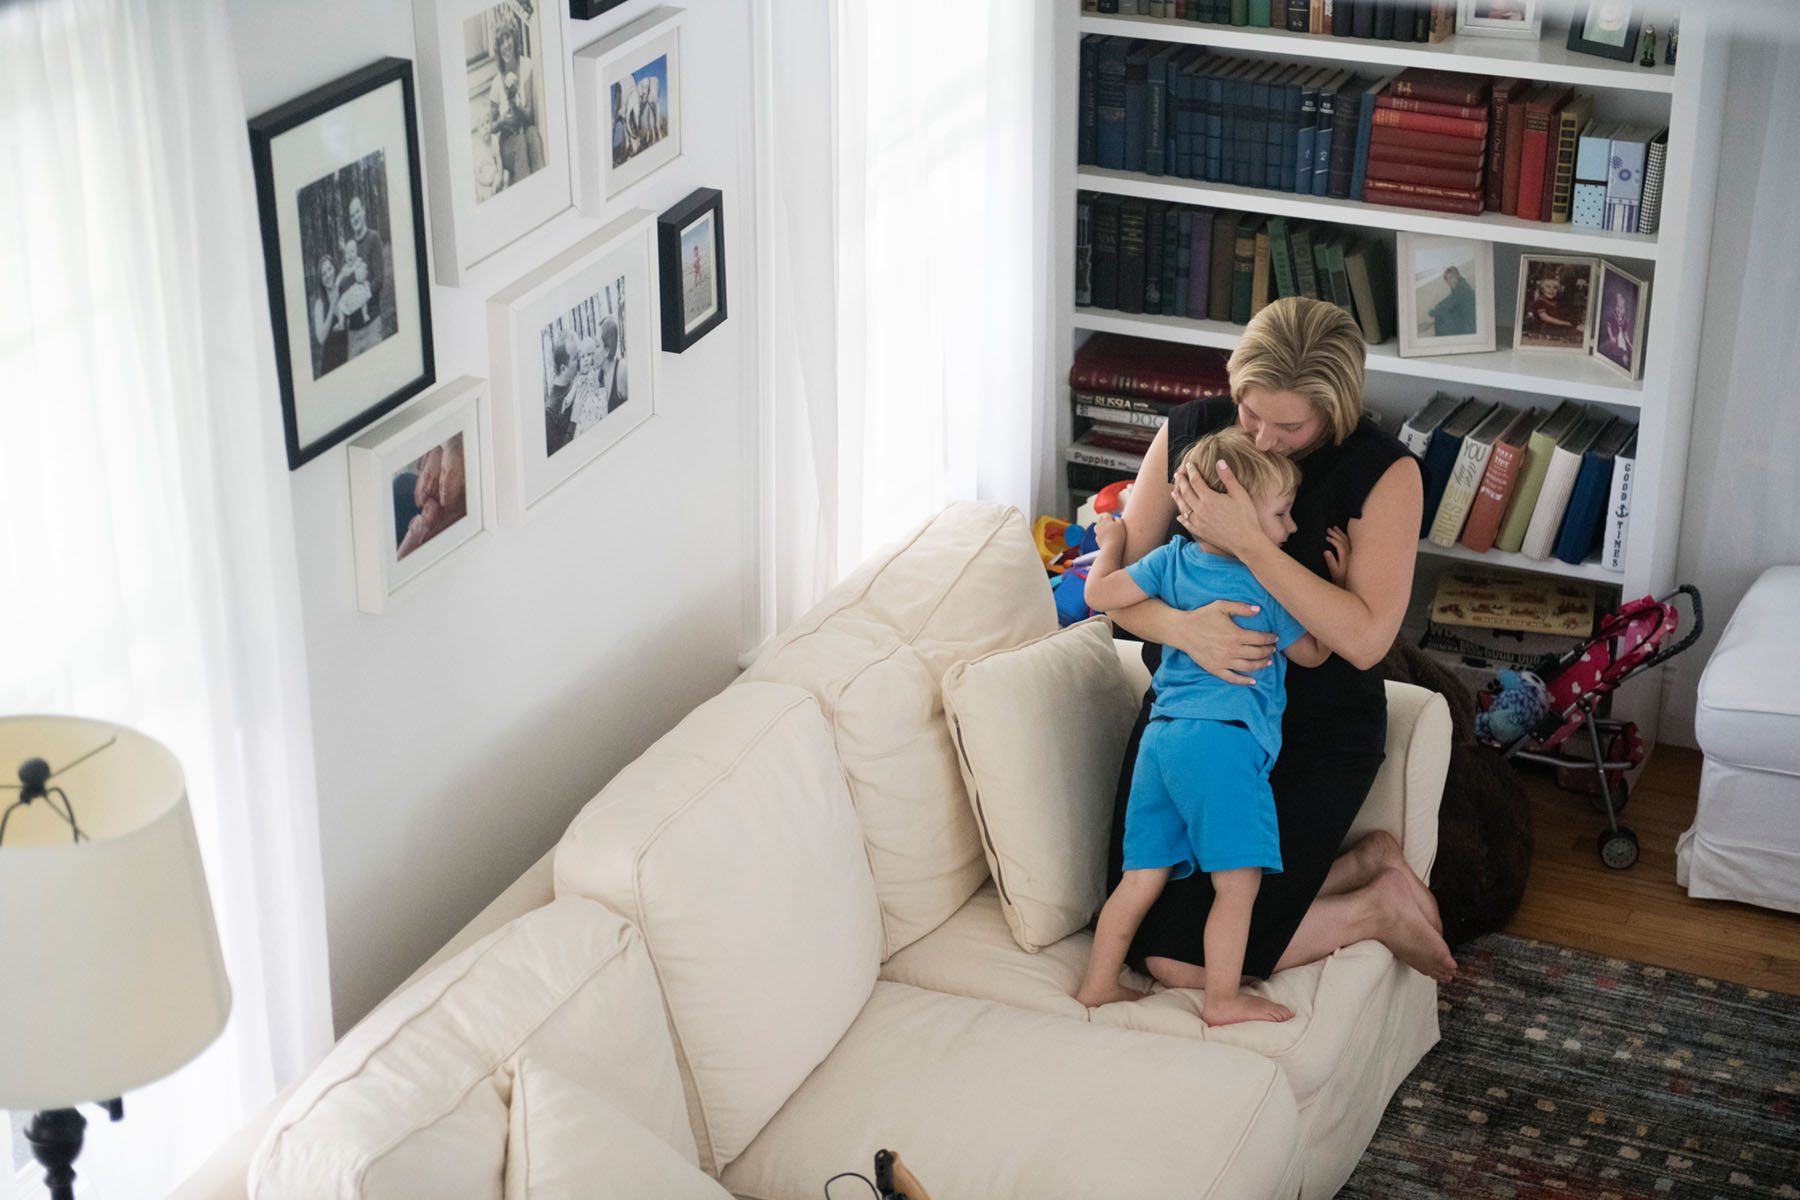 Liuba Grechen Shirley takes a break from shooting her campaign ad to share a hug with her son, Nicholas.